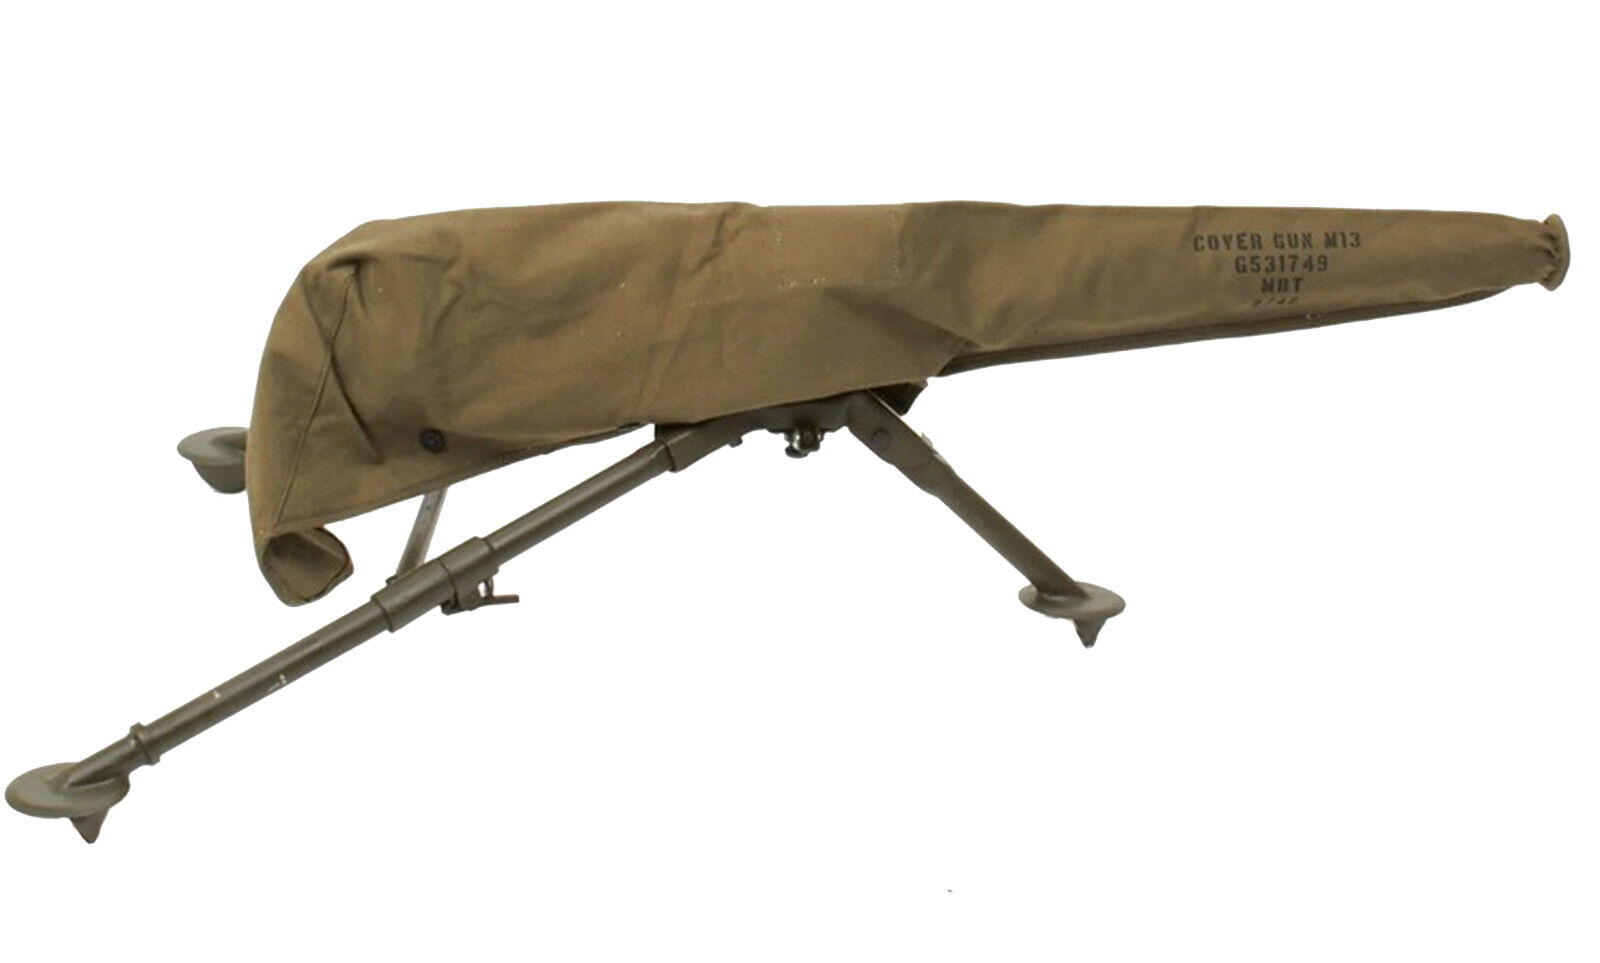 Calyx US WWII 1919 A4 0.30 Cal US Browning M13 Gun Cover Canvas World War Repro